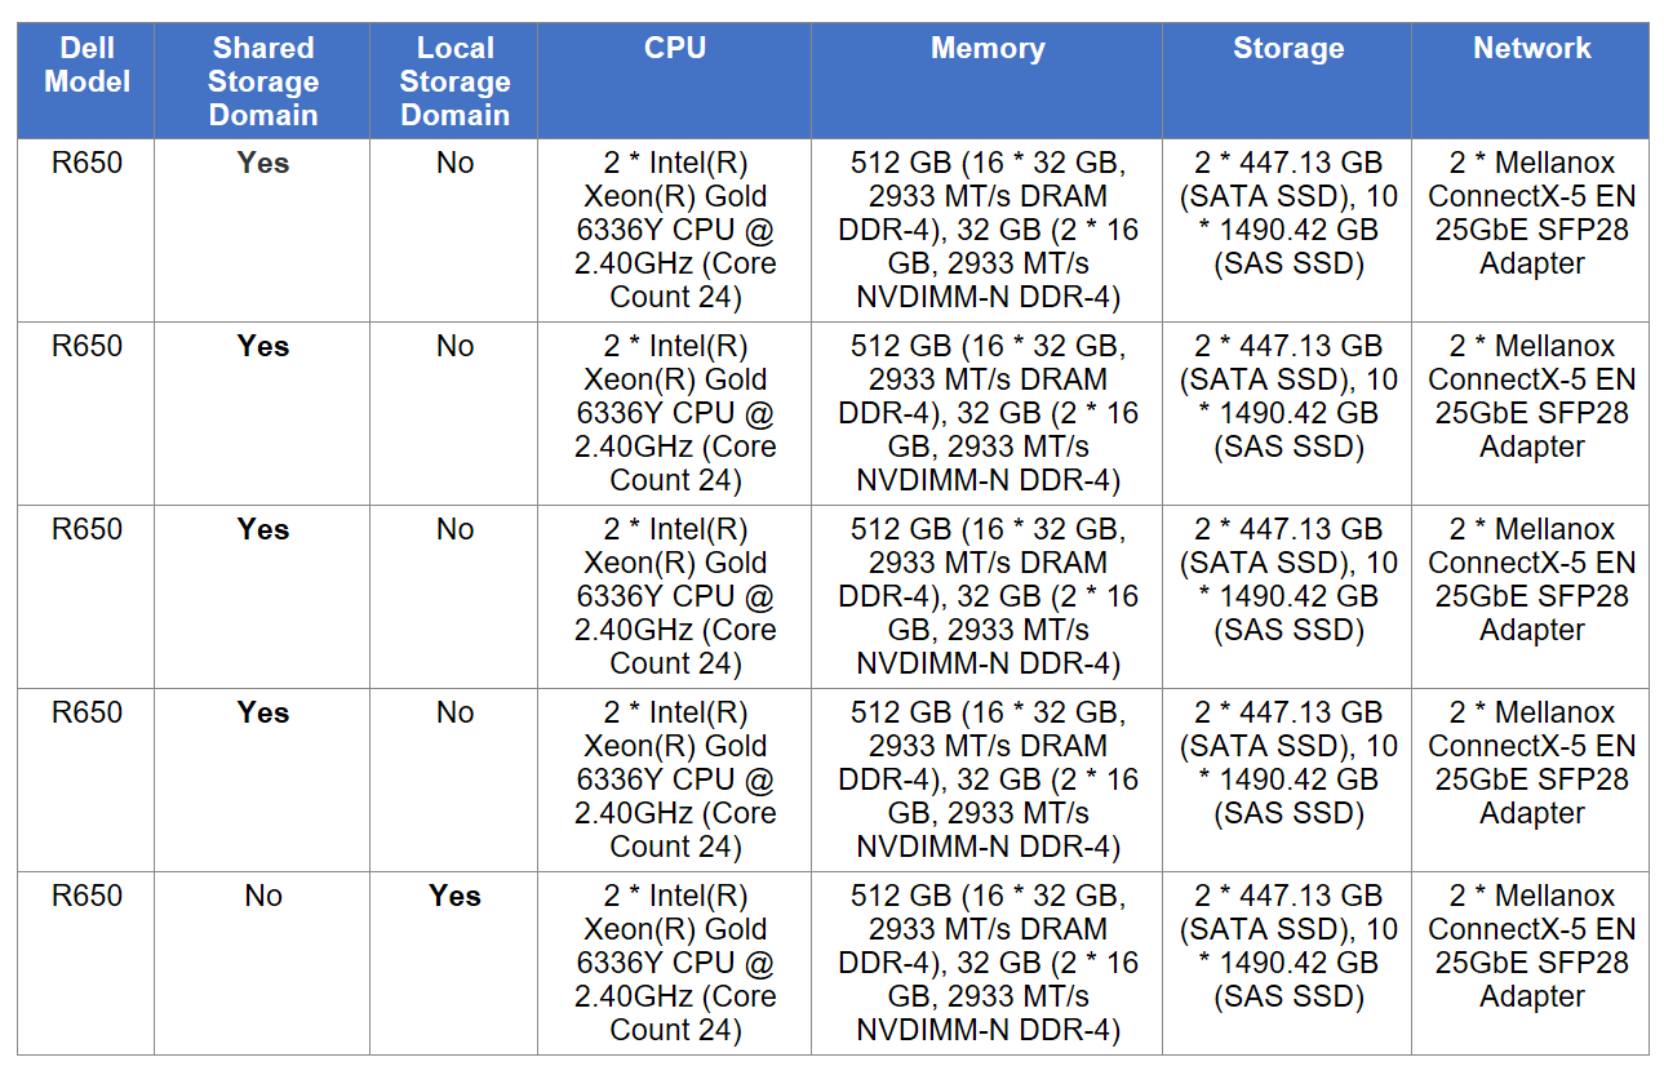 A table listing KVM server configuration details, such as Dell Model, shared storage domain, local storage domain, and hardware requirements.